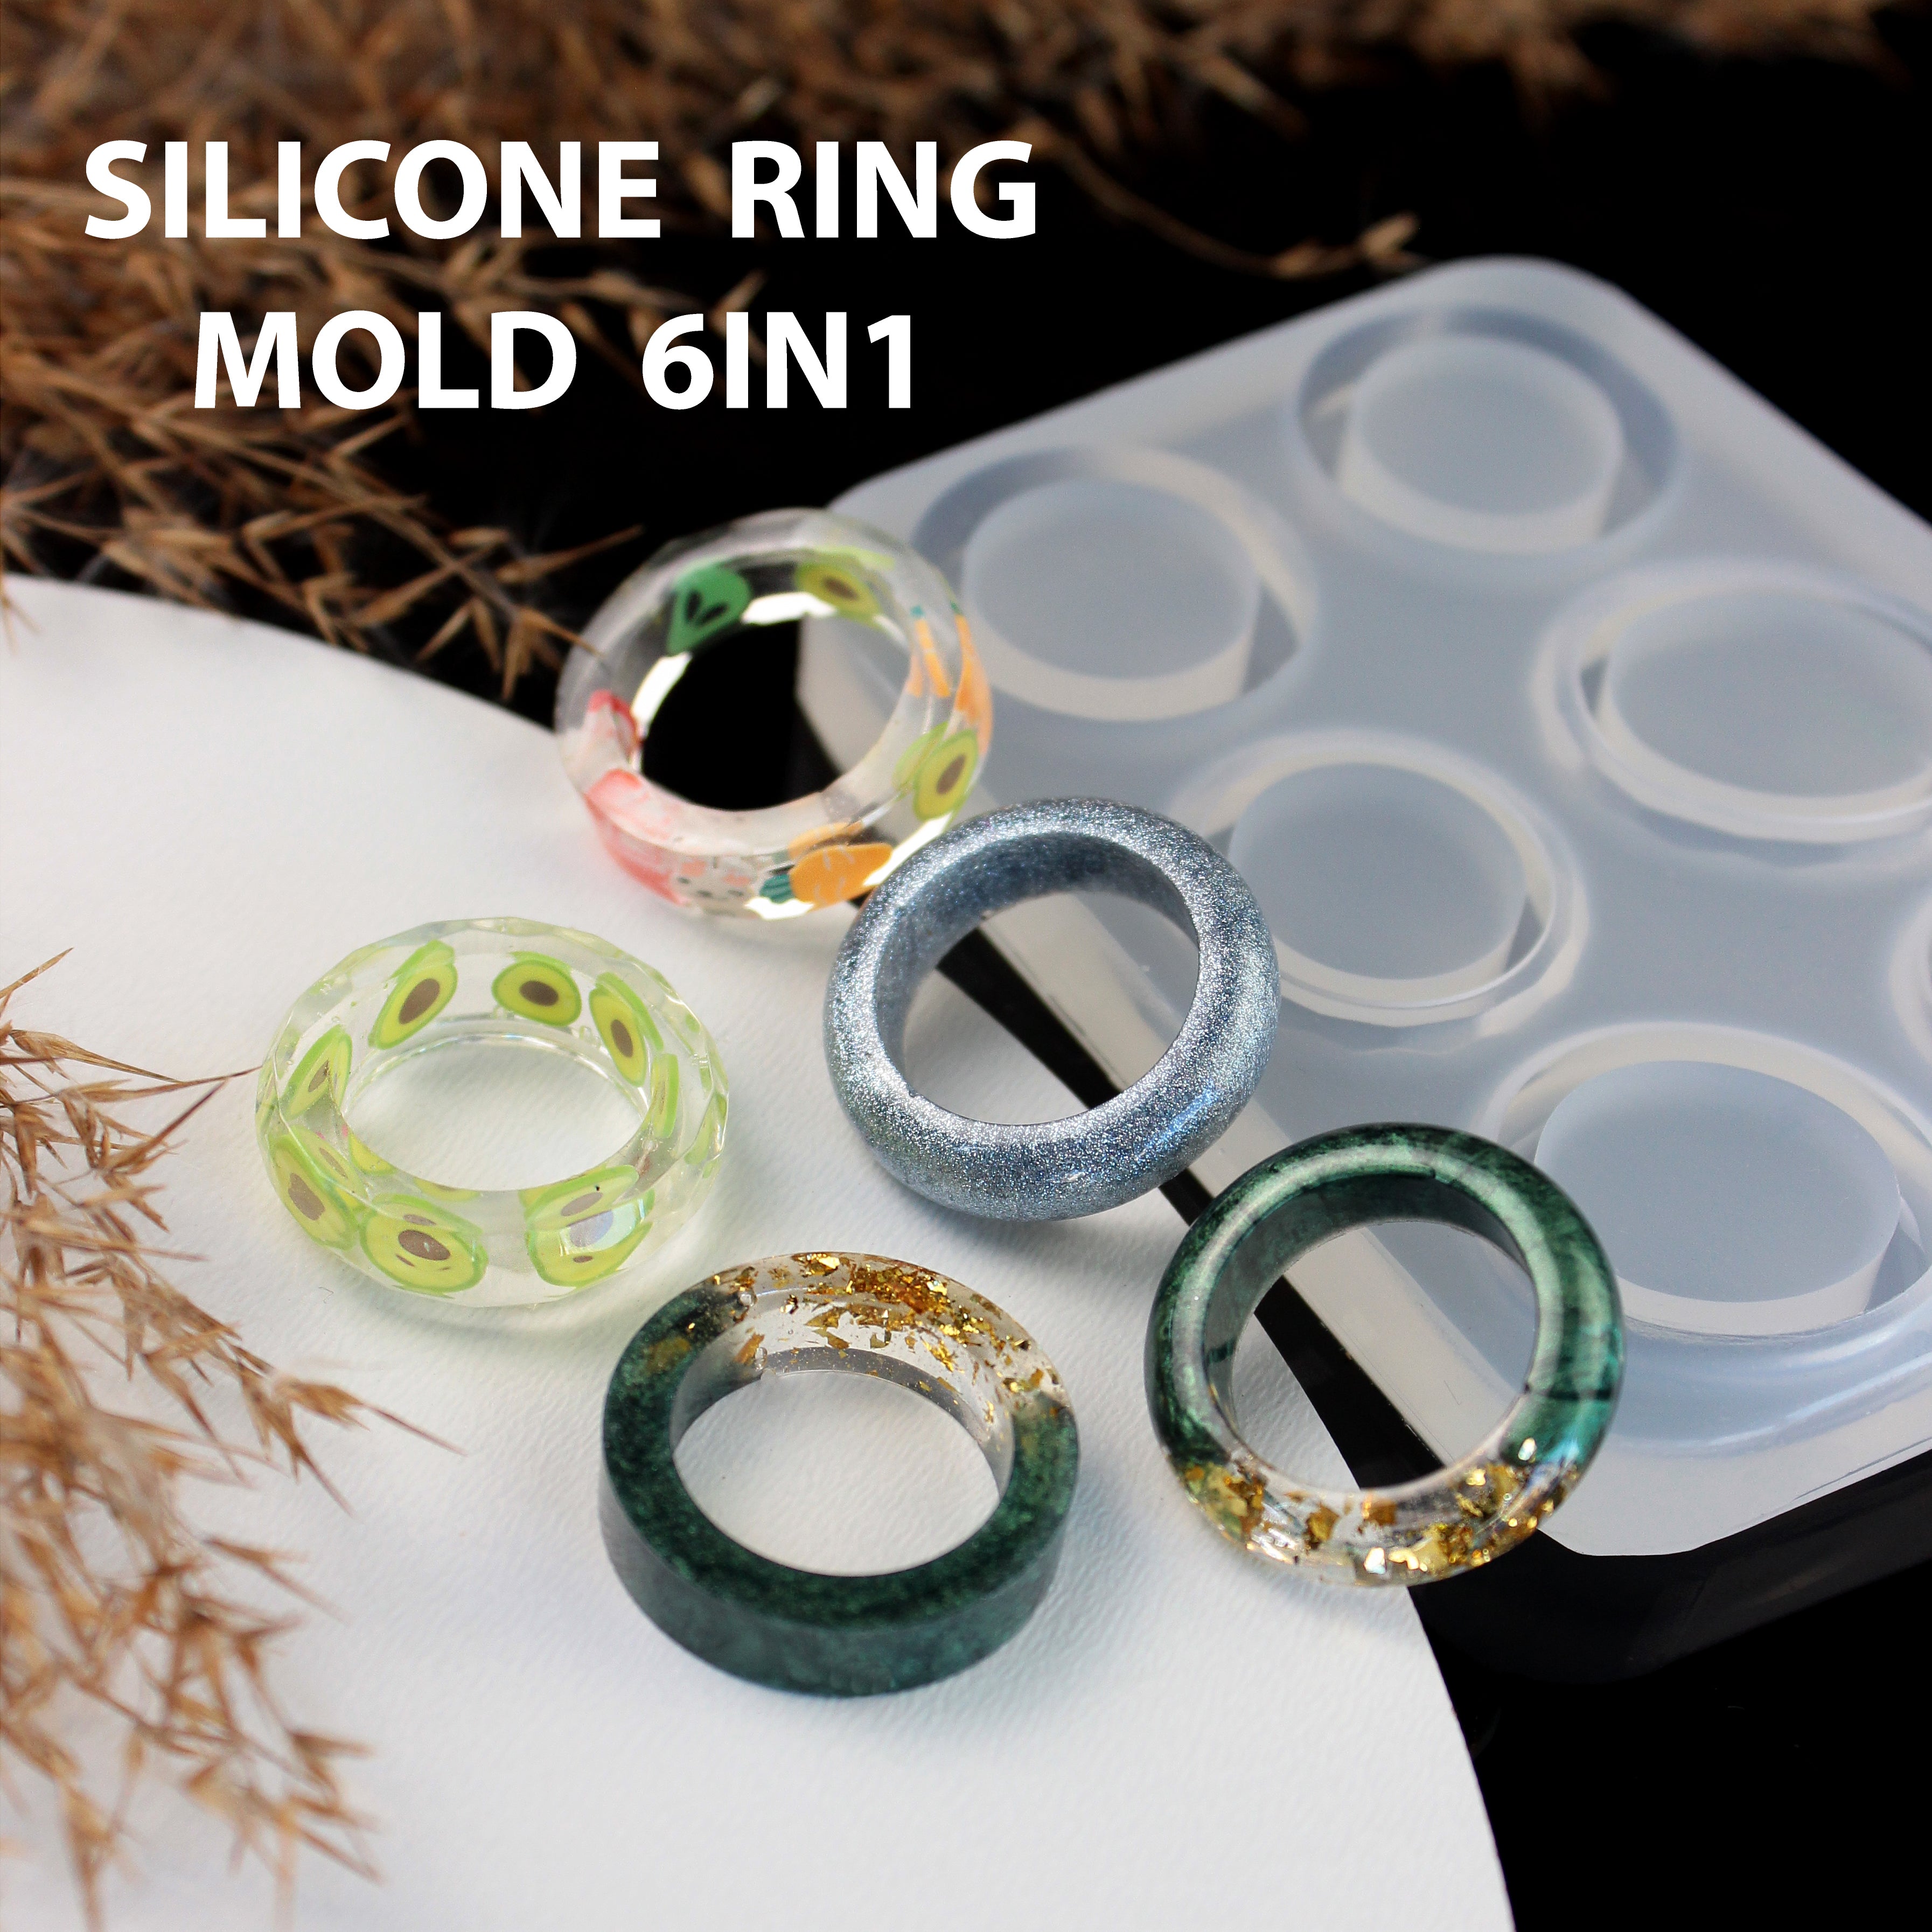 Silicone Ring Mold 6-in-1 for Epoxy Resin Crafts, Jewelry Making and DIY